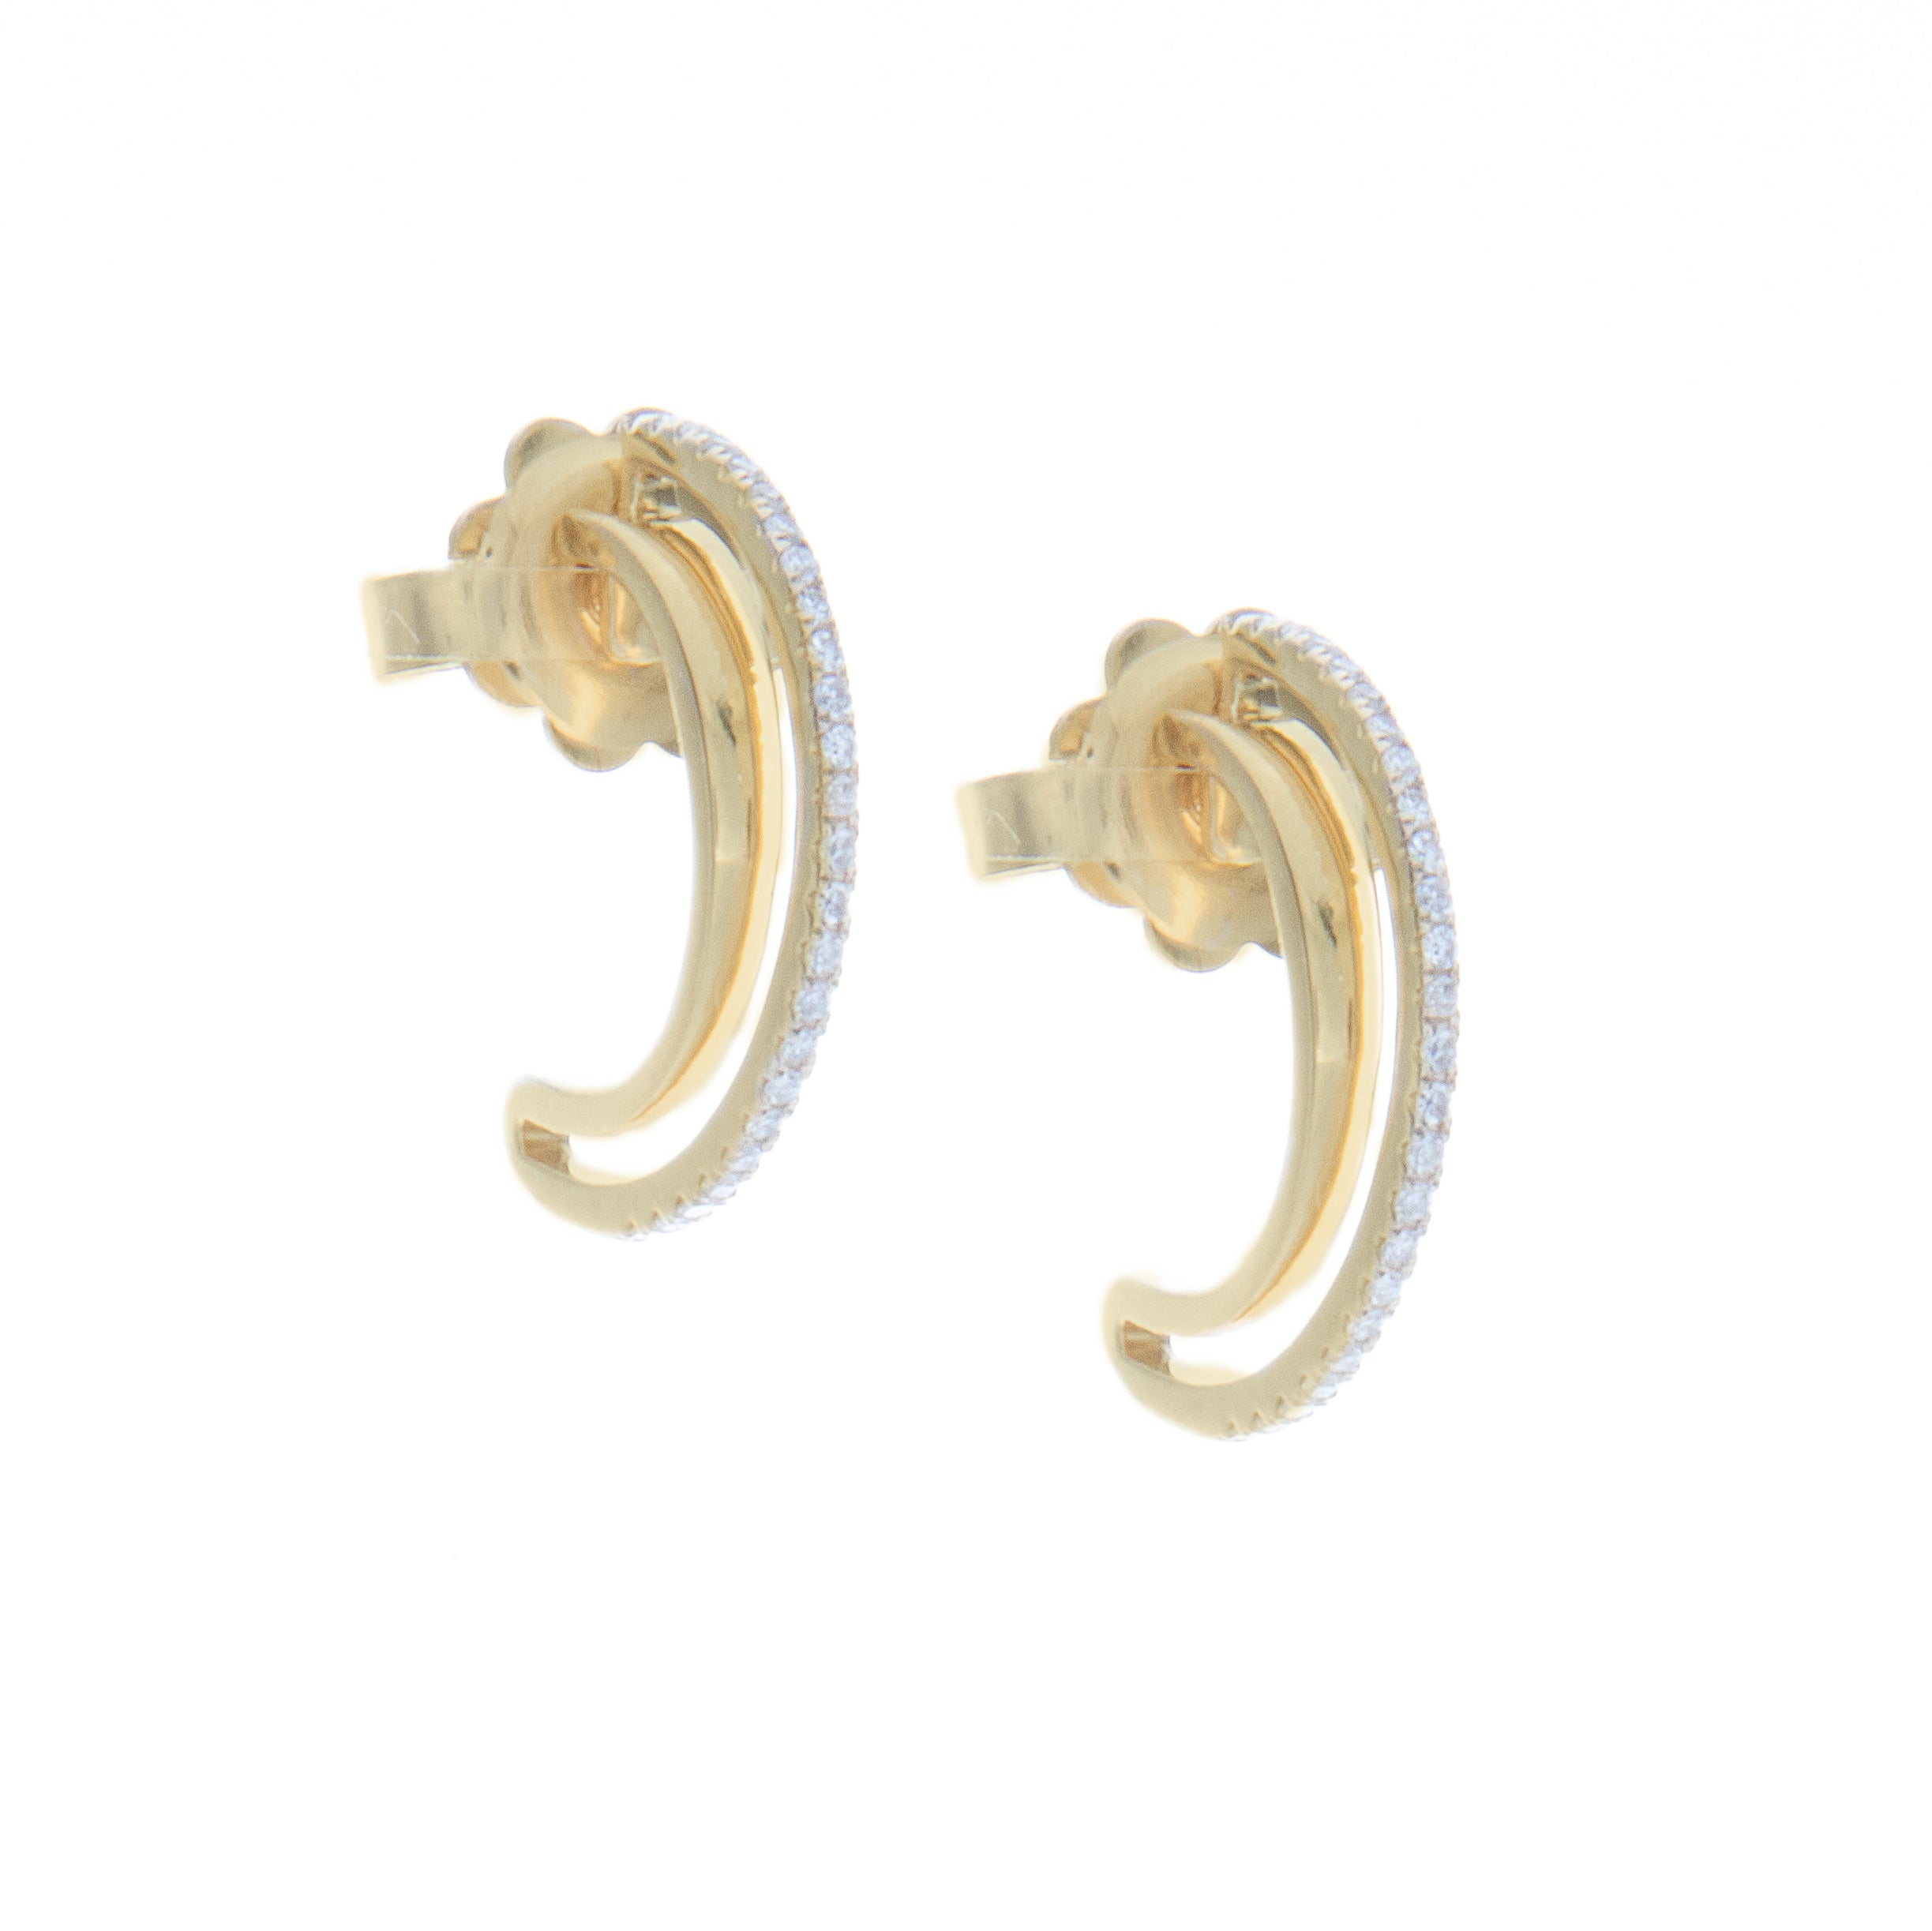 Real Yellow Solid Gold GF Carved Hoop Earrings 22 18mm Unconditional  Lifetime Replacement For Women Guaranteed Lifetime Gold Filled Jewelry From  Uxkst, $16.55 | DHgate.Com